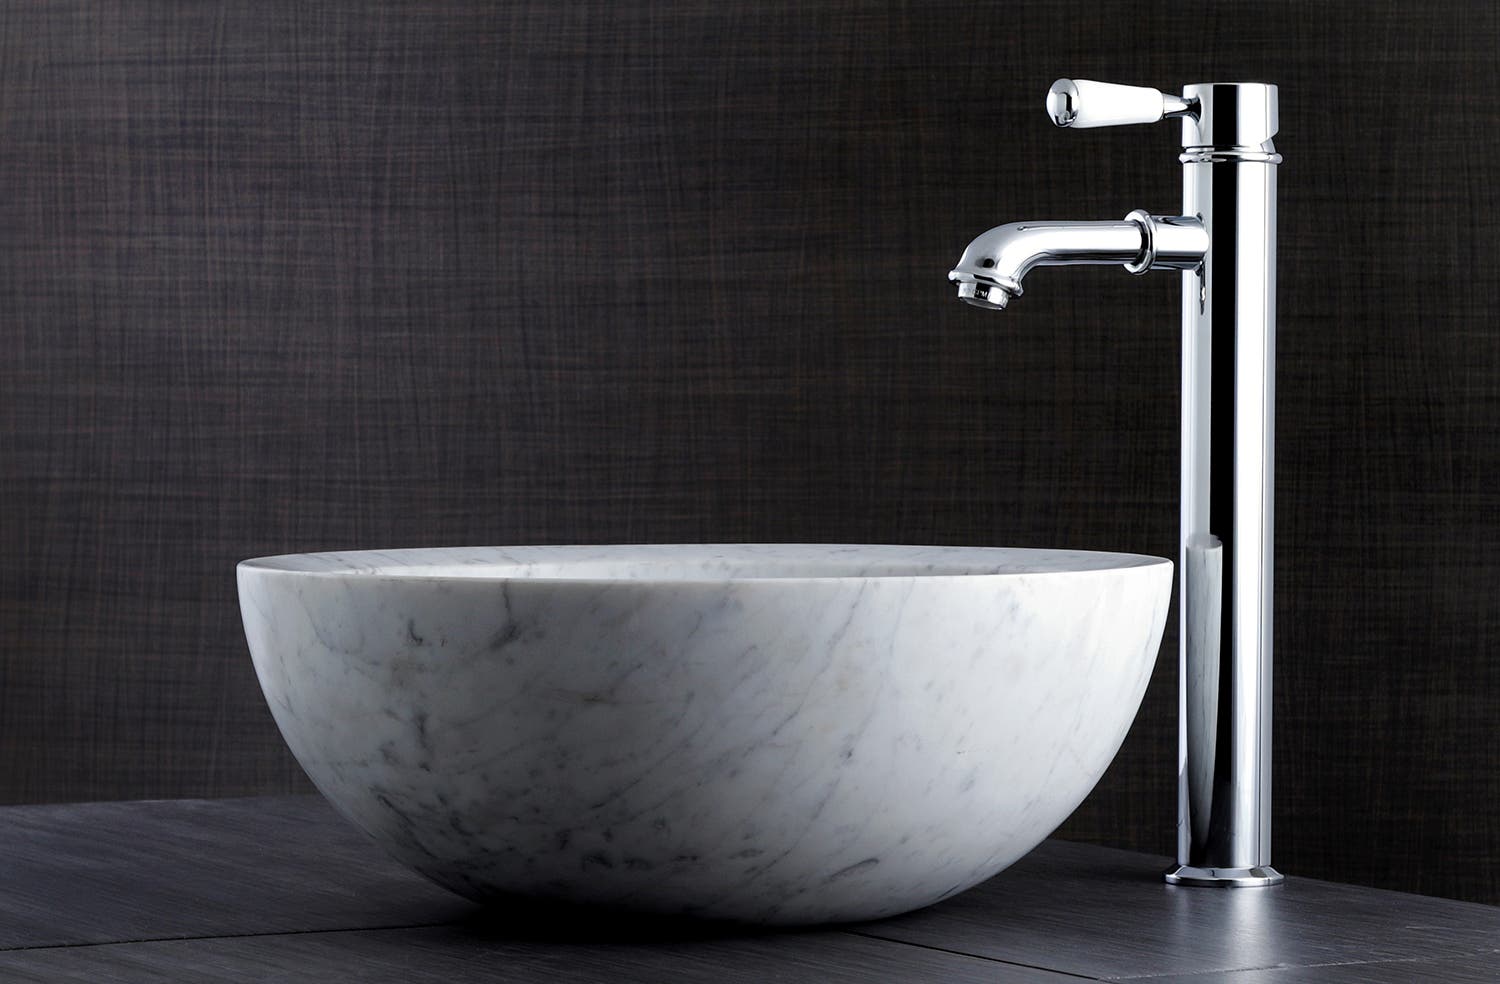 Tips for a more visually appealing bathroom sink